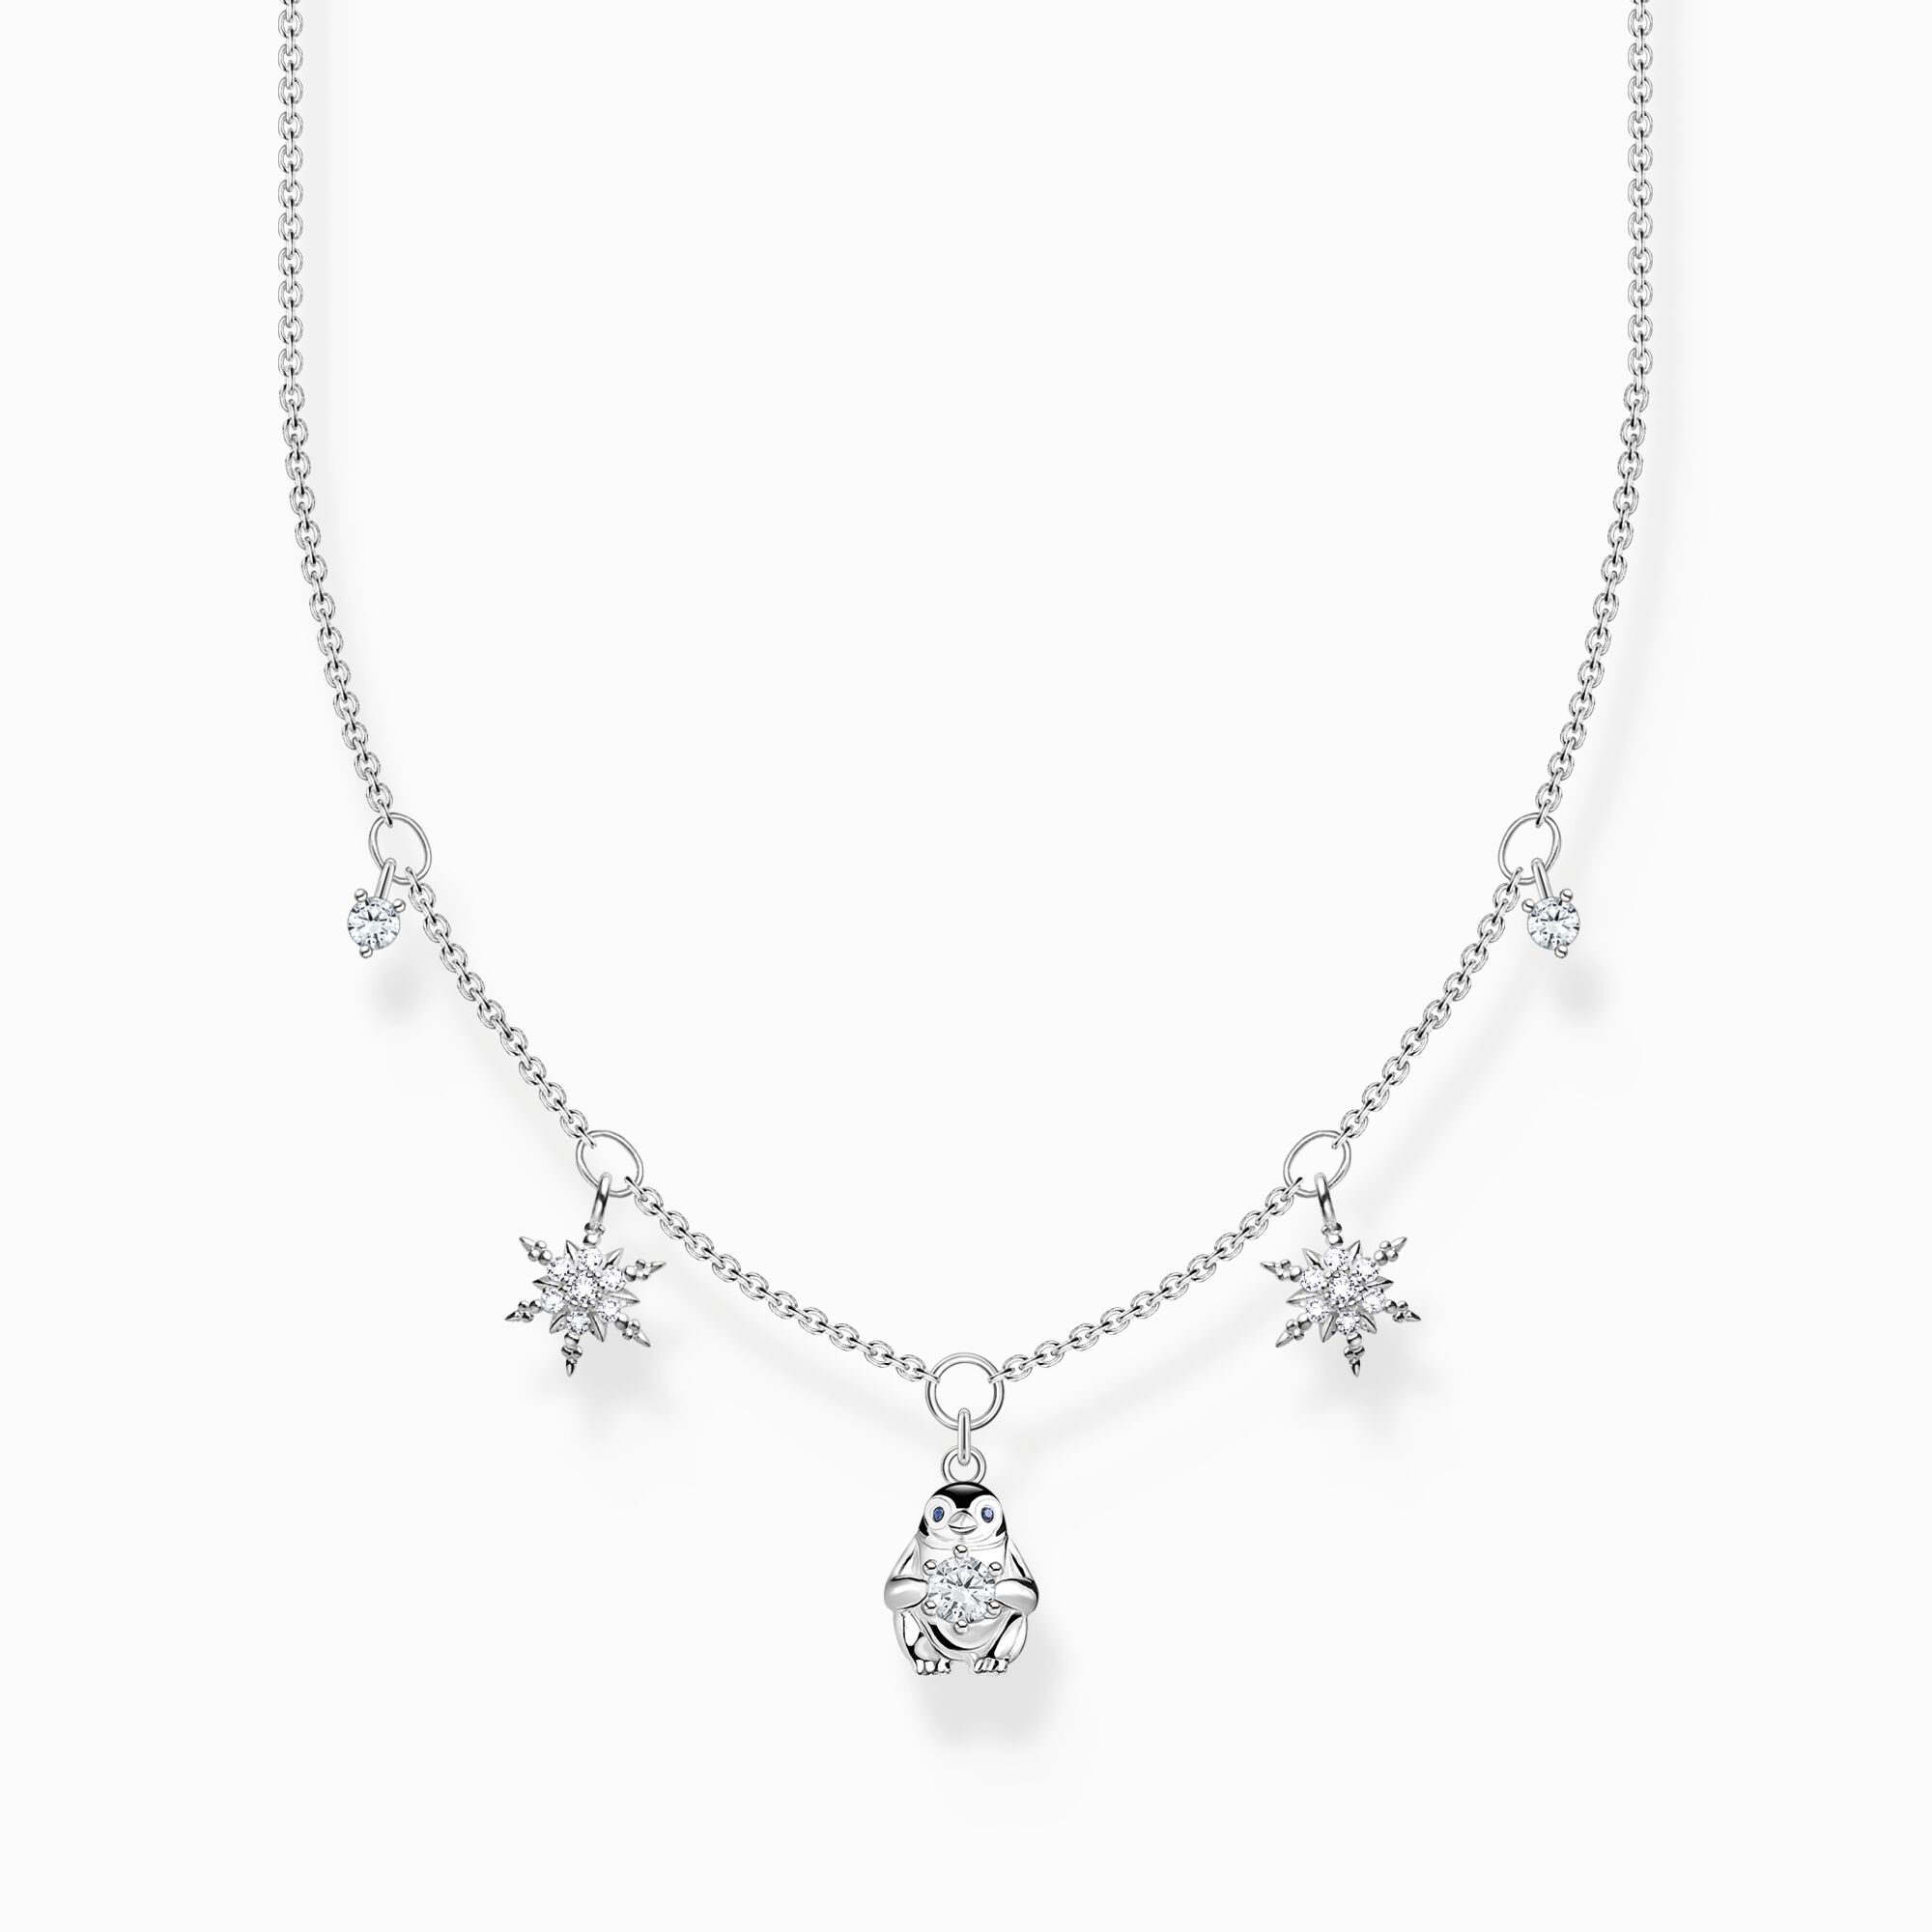 Necklace penguin and snowflakes silver from the Charming Collection collection in the THOMAS SABO online store